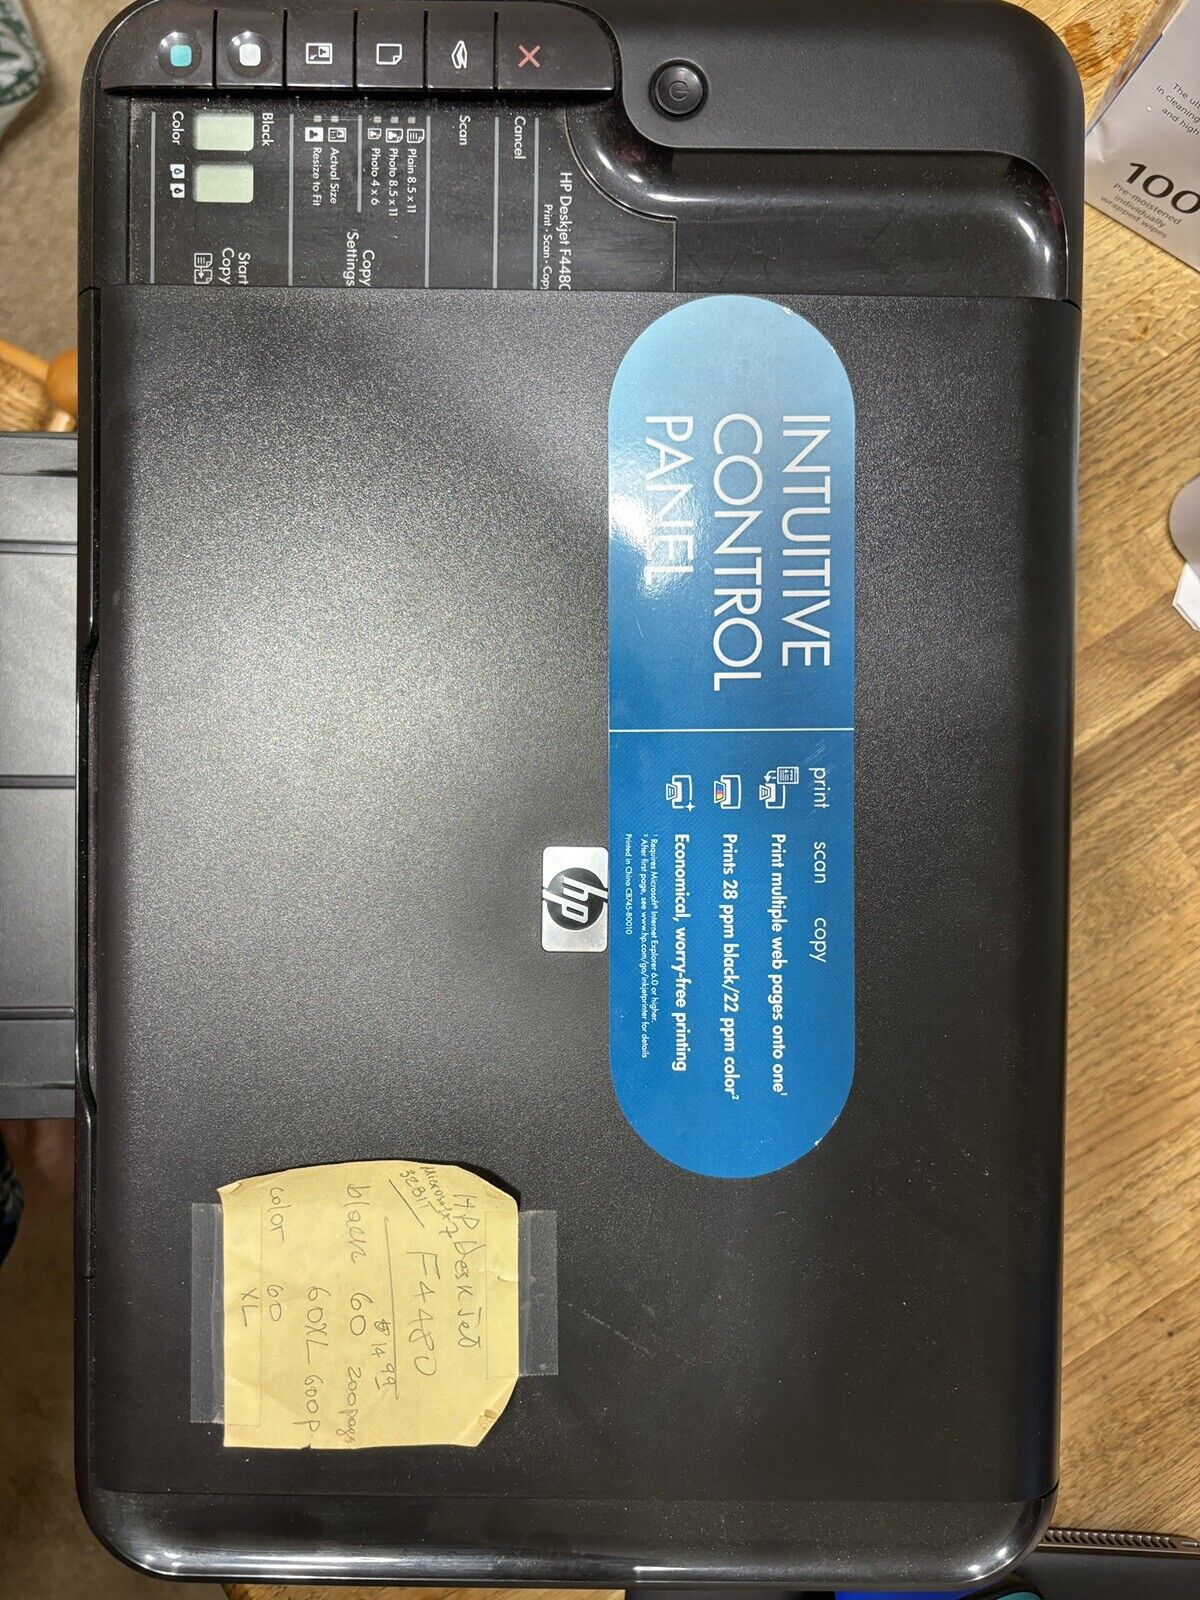 HP Inkjet Printer with Copy and Scan Feature